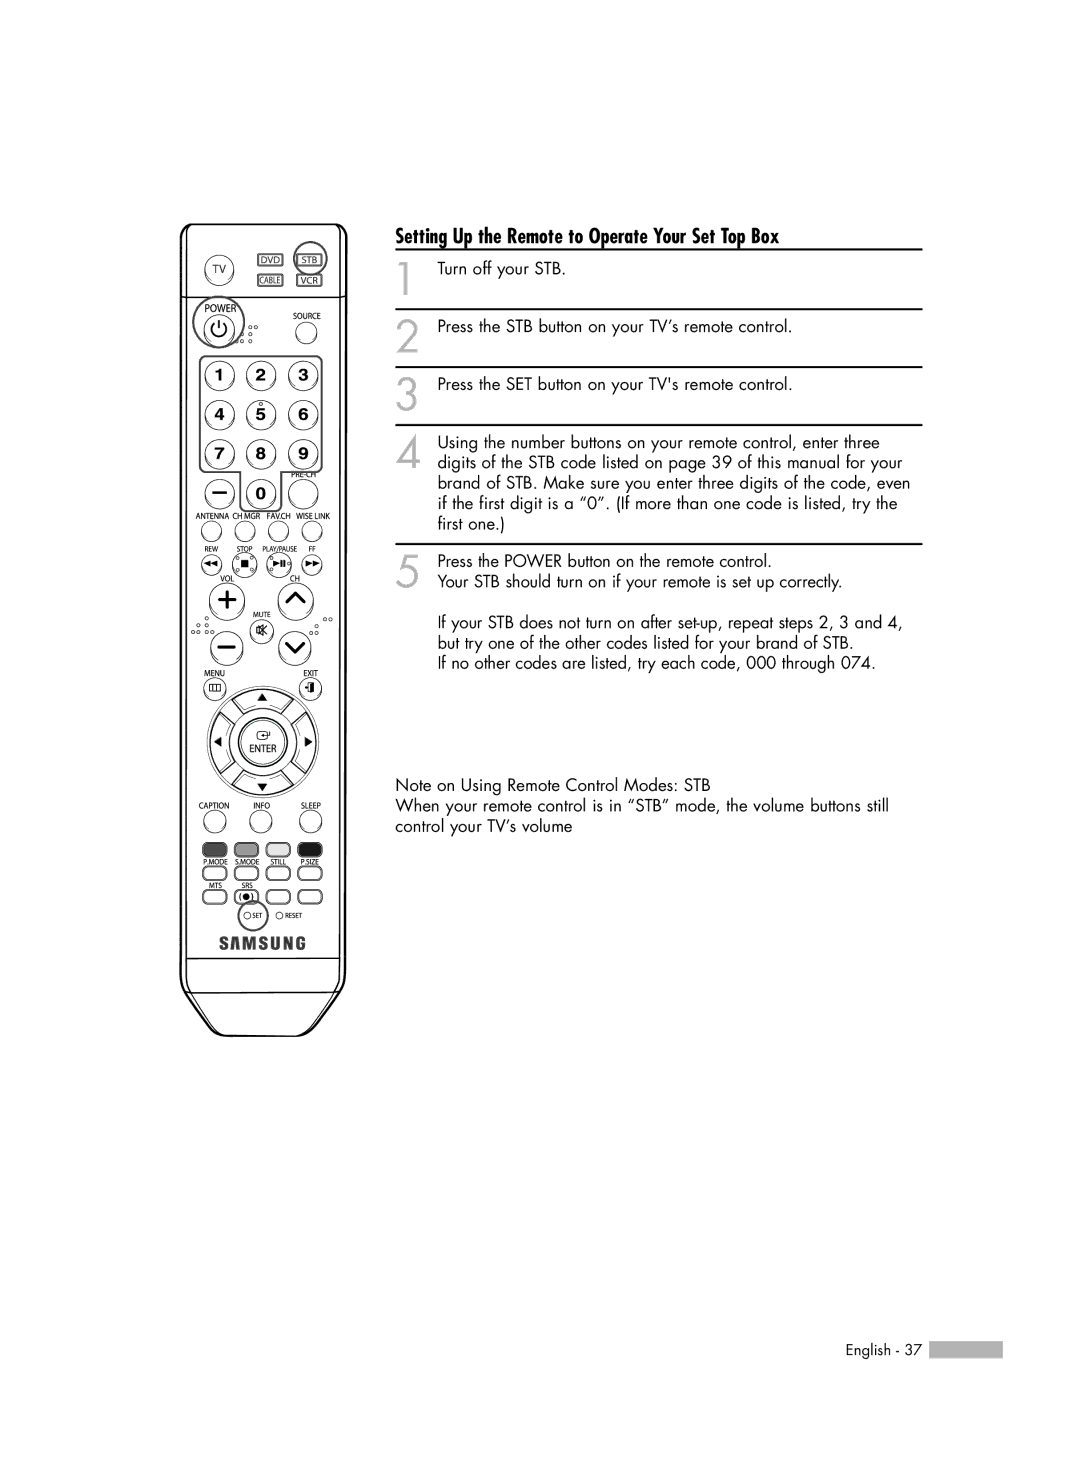 Samsung HL-S5066W, HL-S6166W, HL-S4666W, HL-S5666W manual Setting Up the Remote to Operate Your Set Top Box 